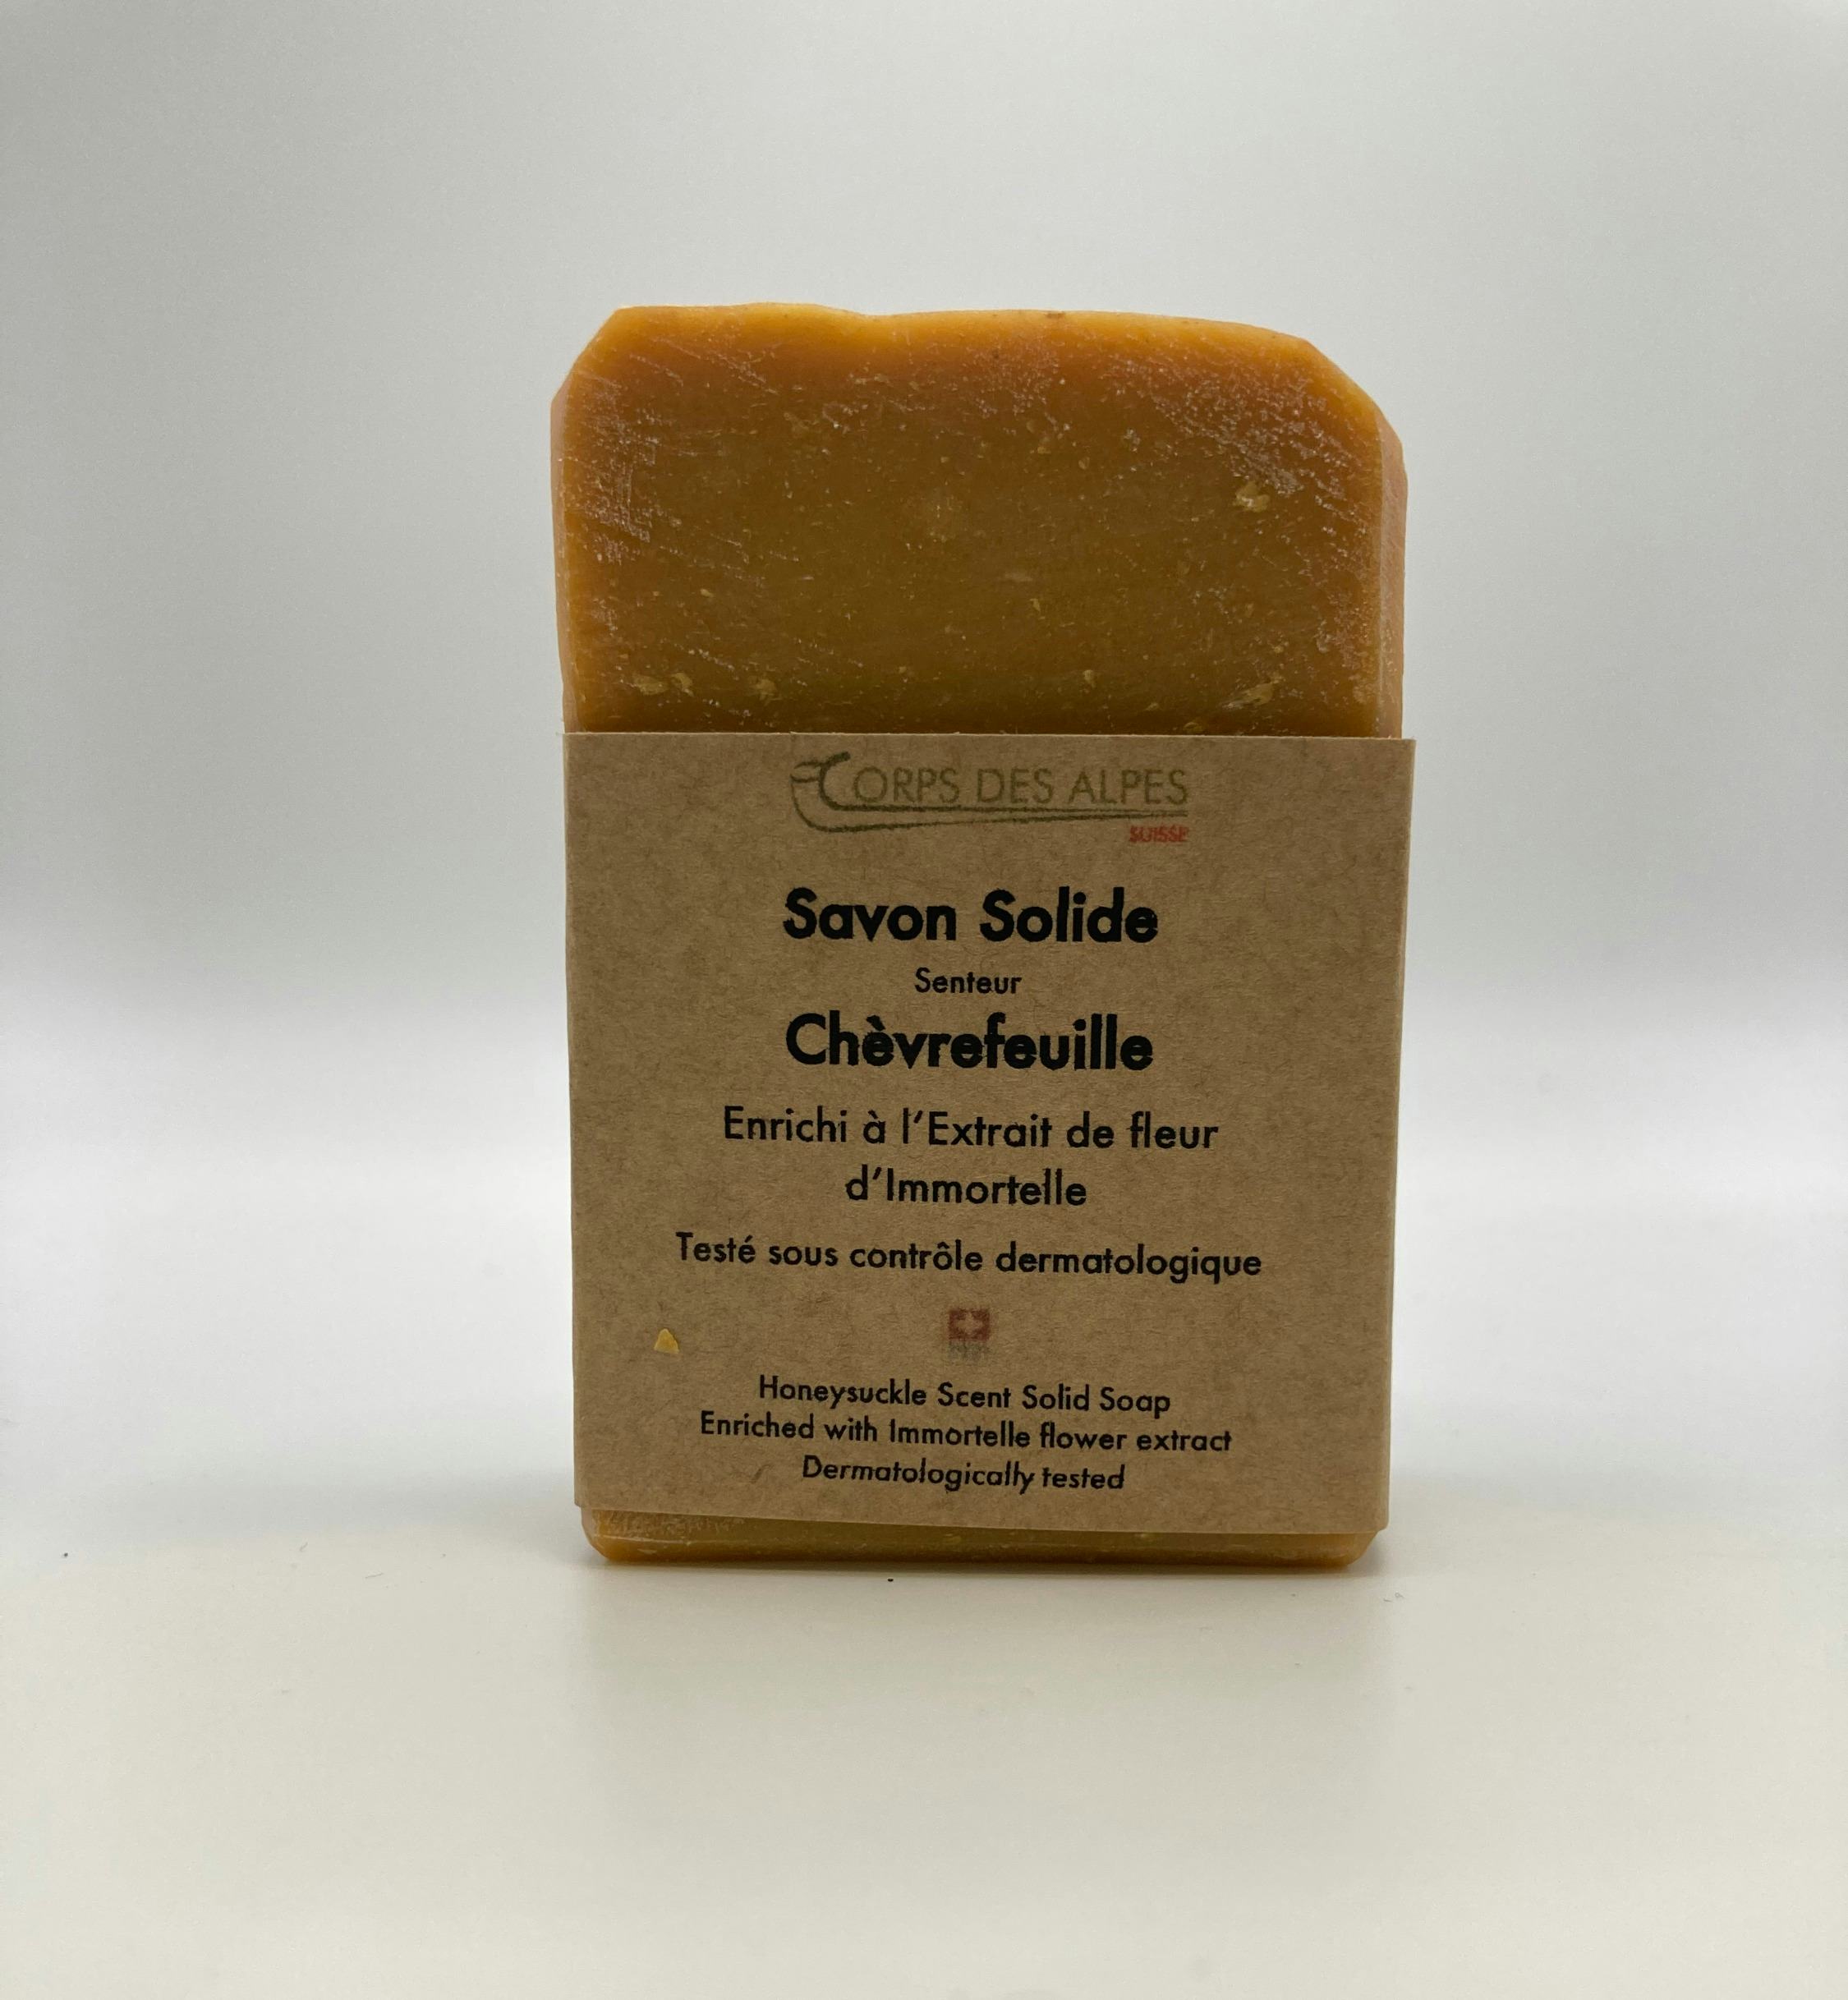 Honeysuckle scented solid soap, artisanal product for direct sale in Switzerland